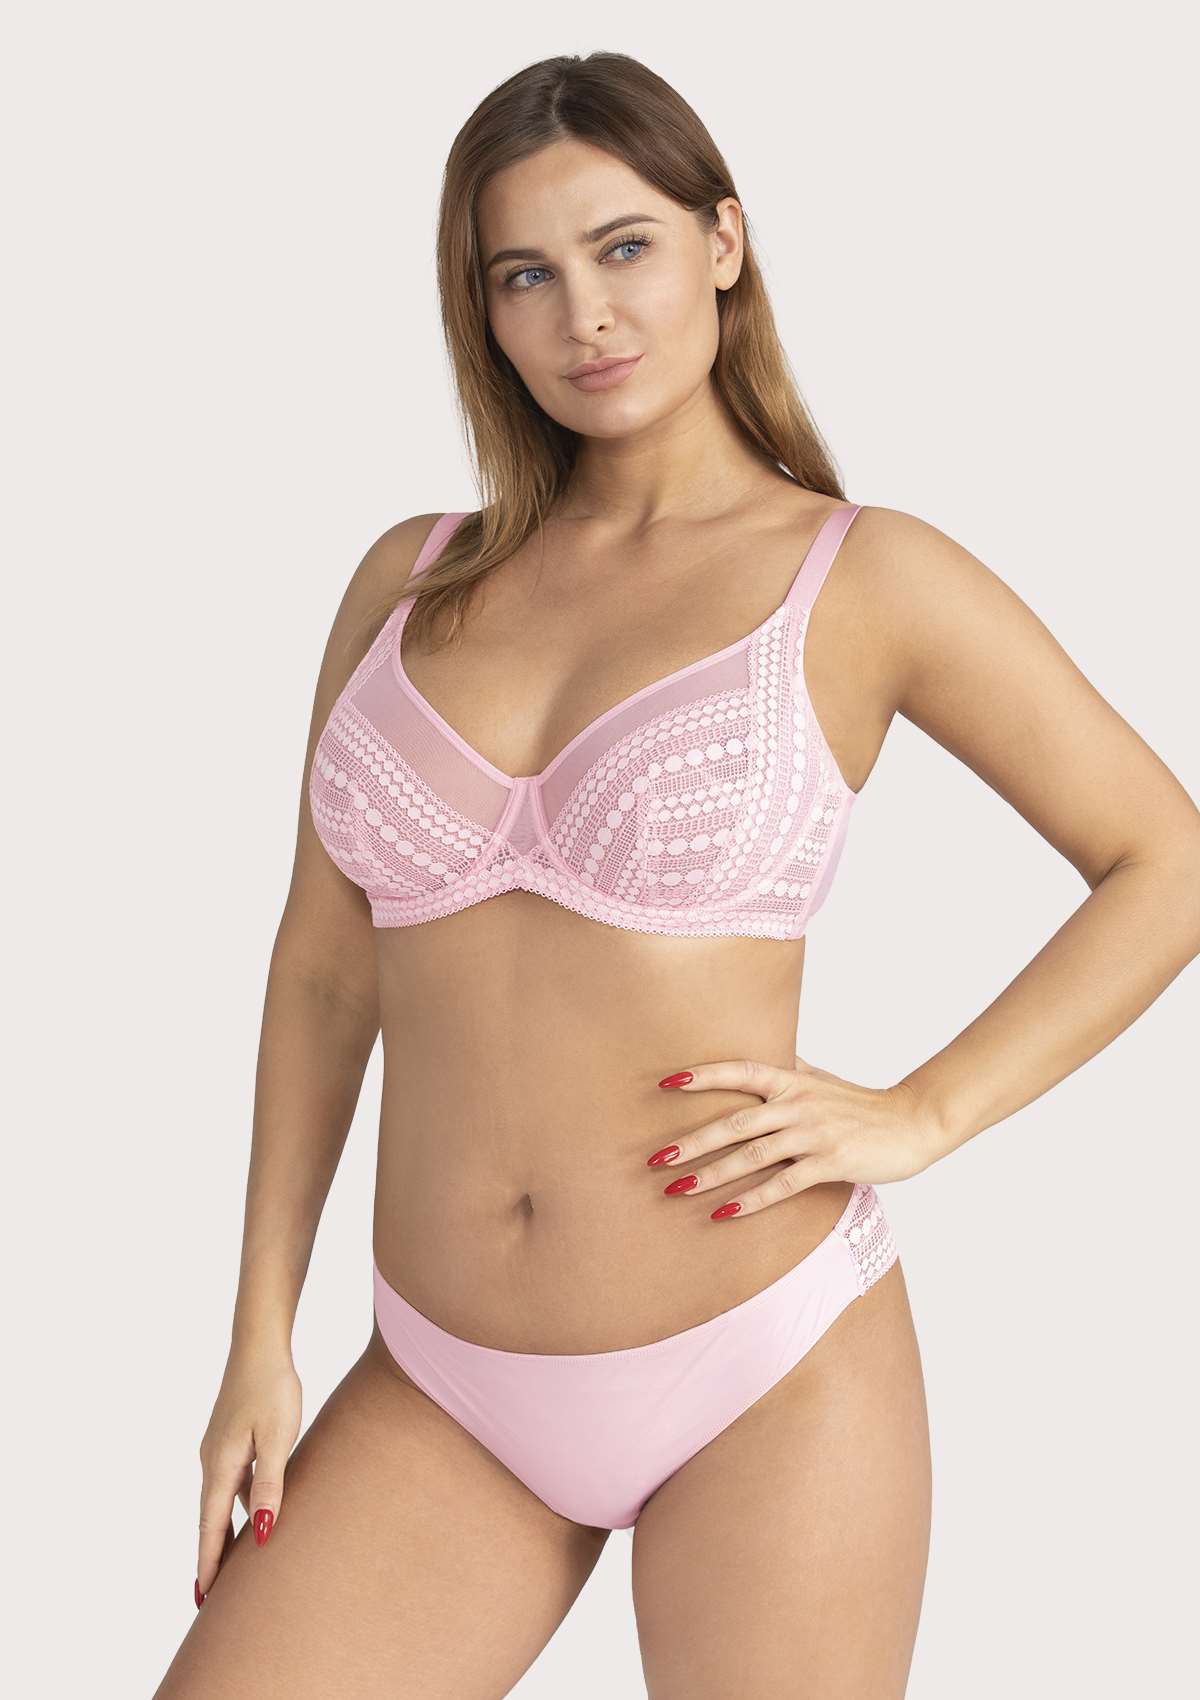 HSIA Heroine Lace Bra And Panties Set: Most Comfortable Supportive Bra - Pink / 40 / D